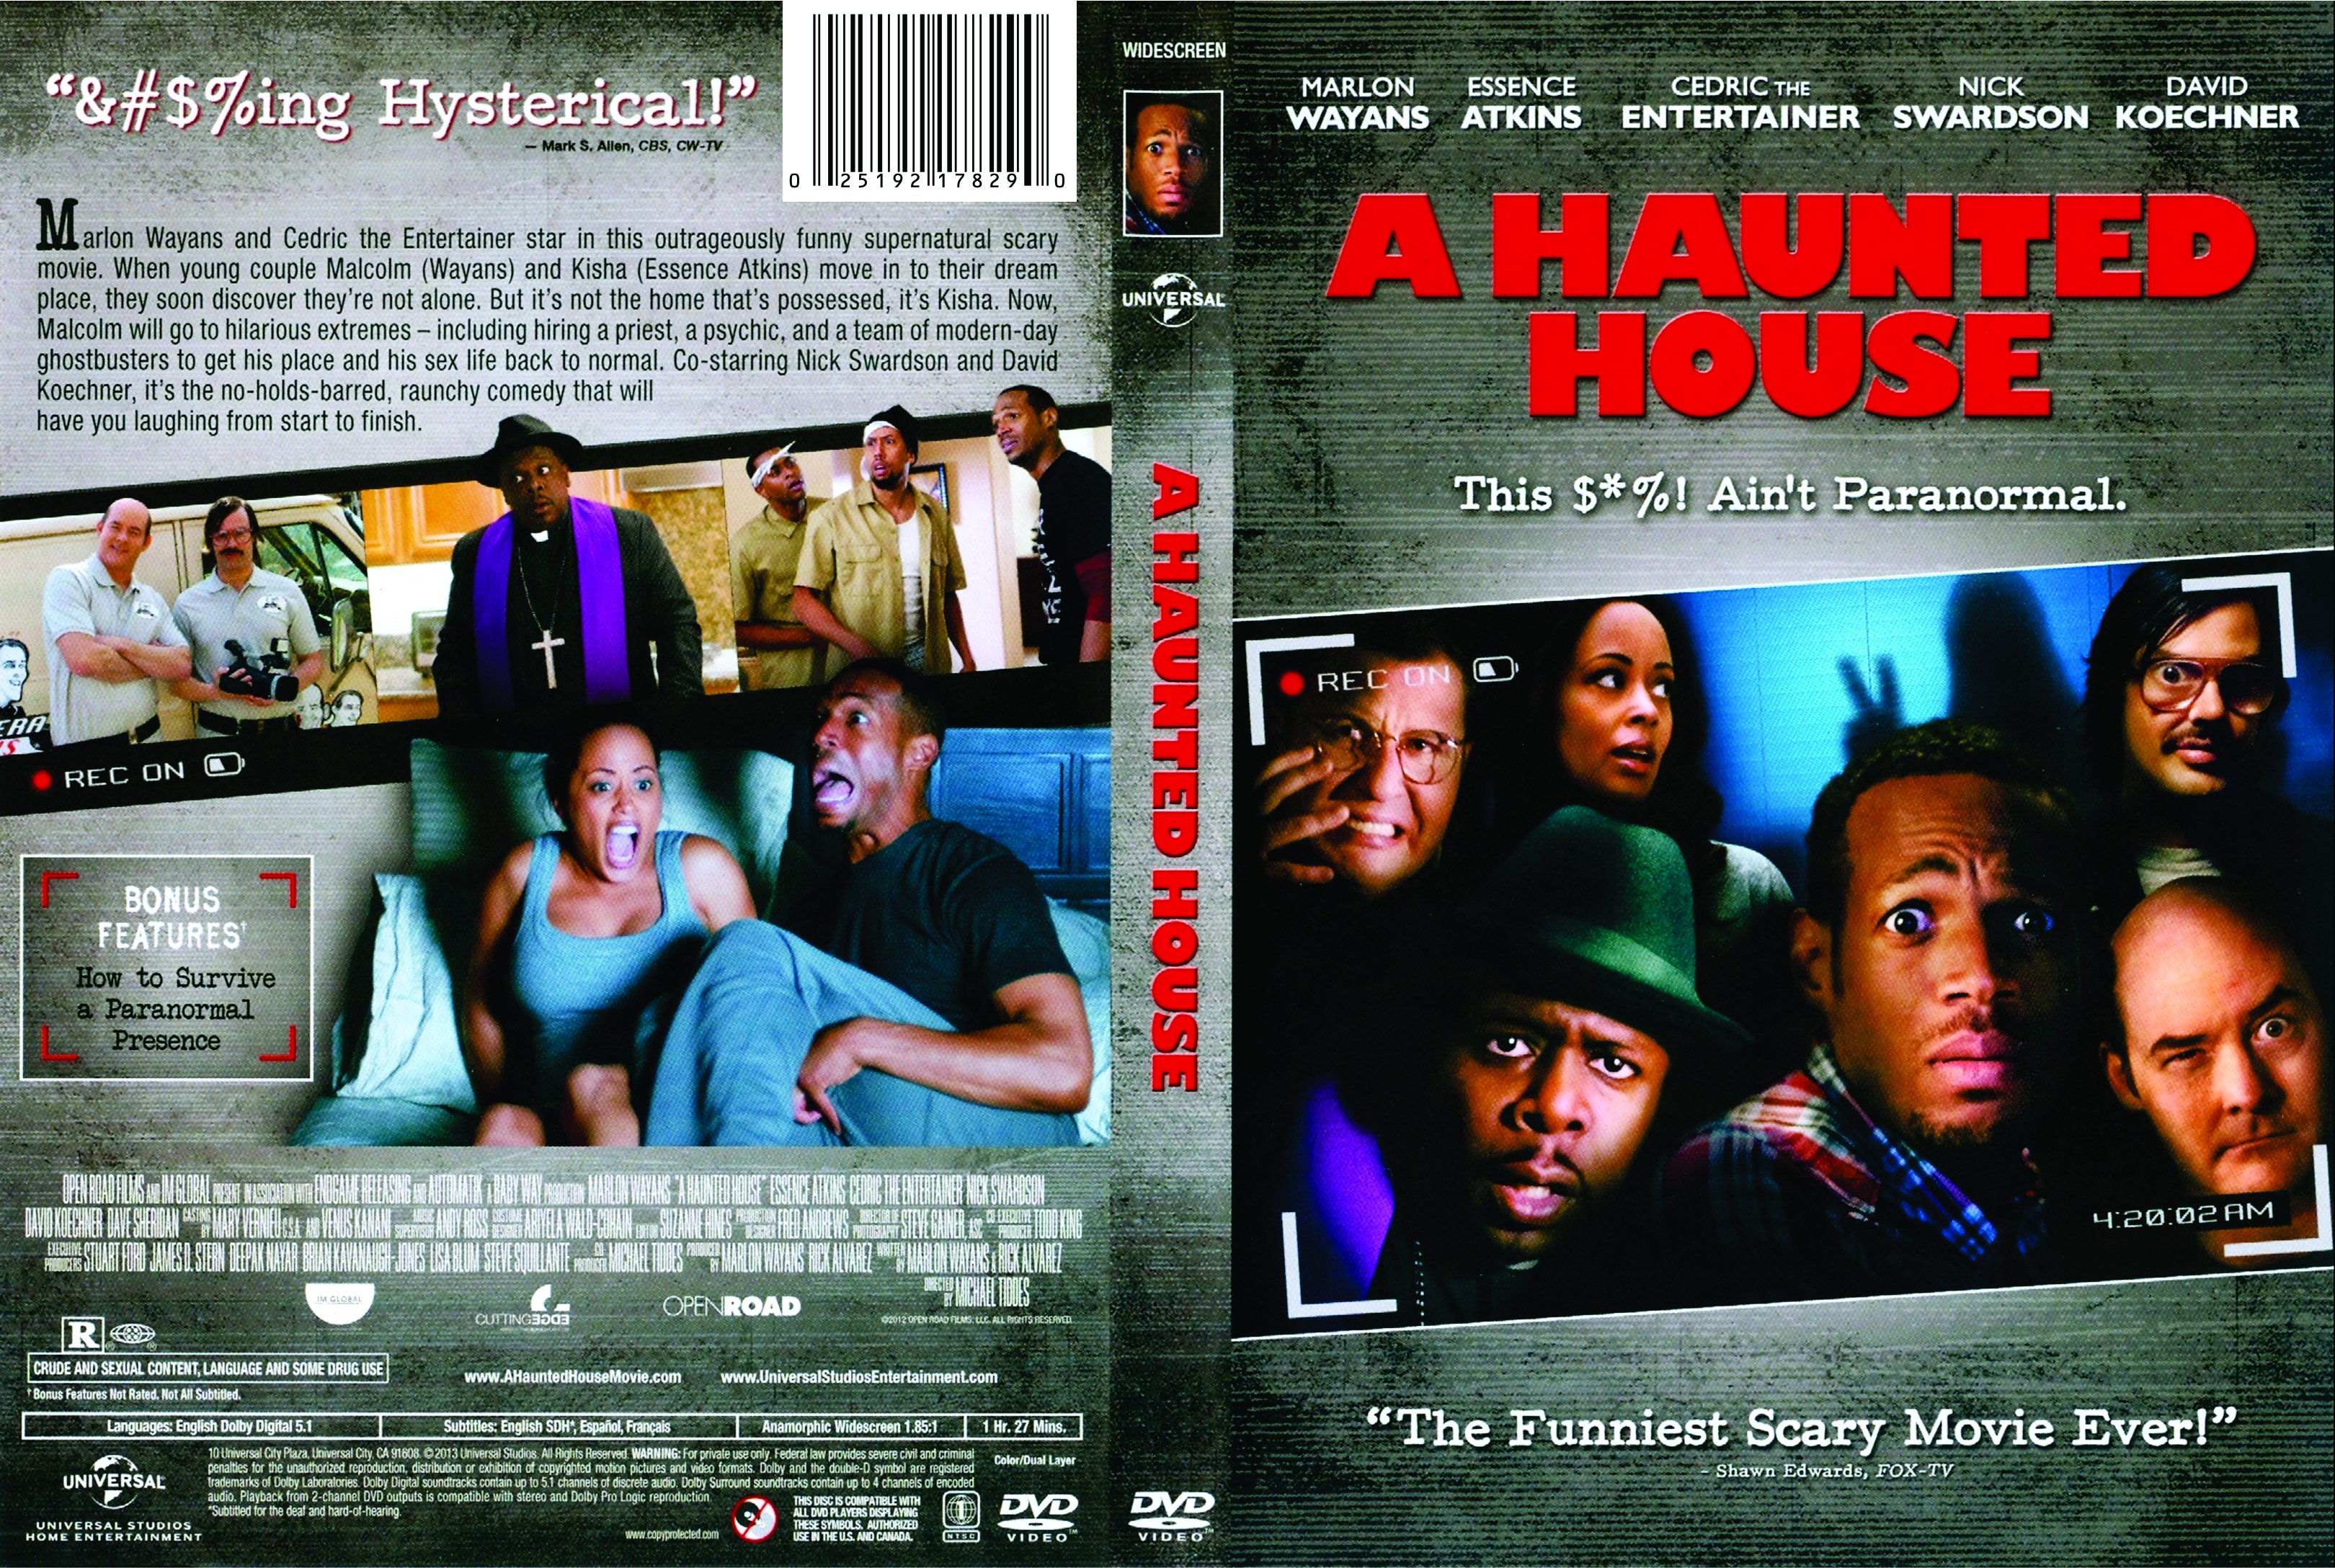 Jaquette DVD A Haunted House Zone 1